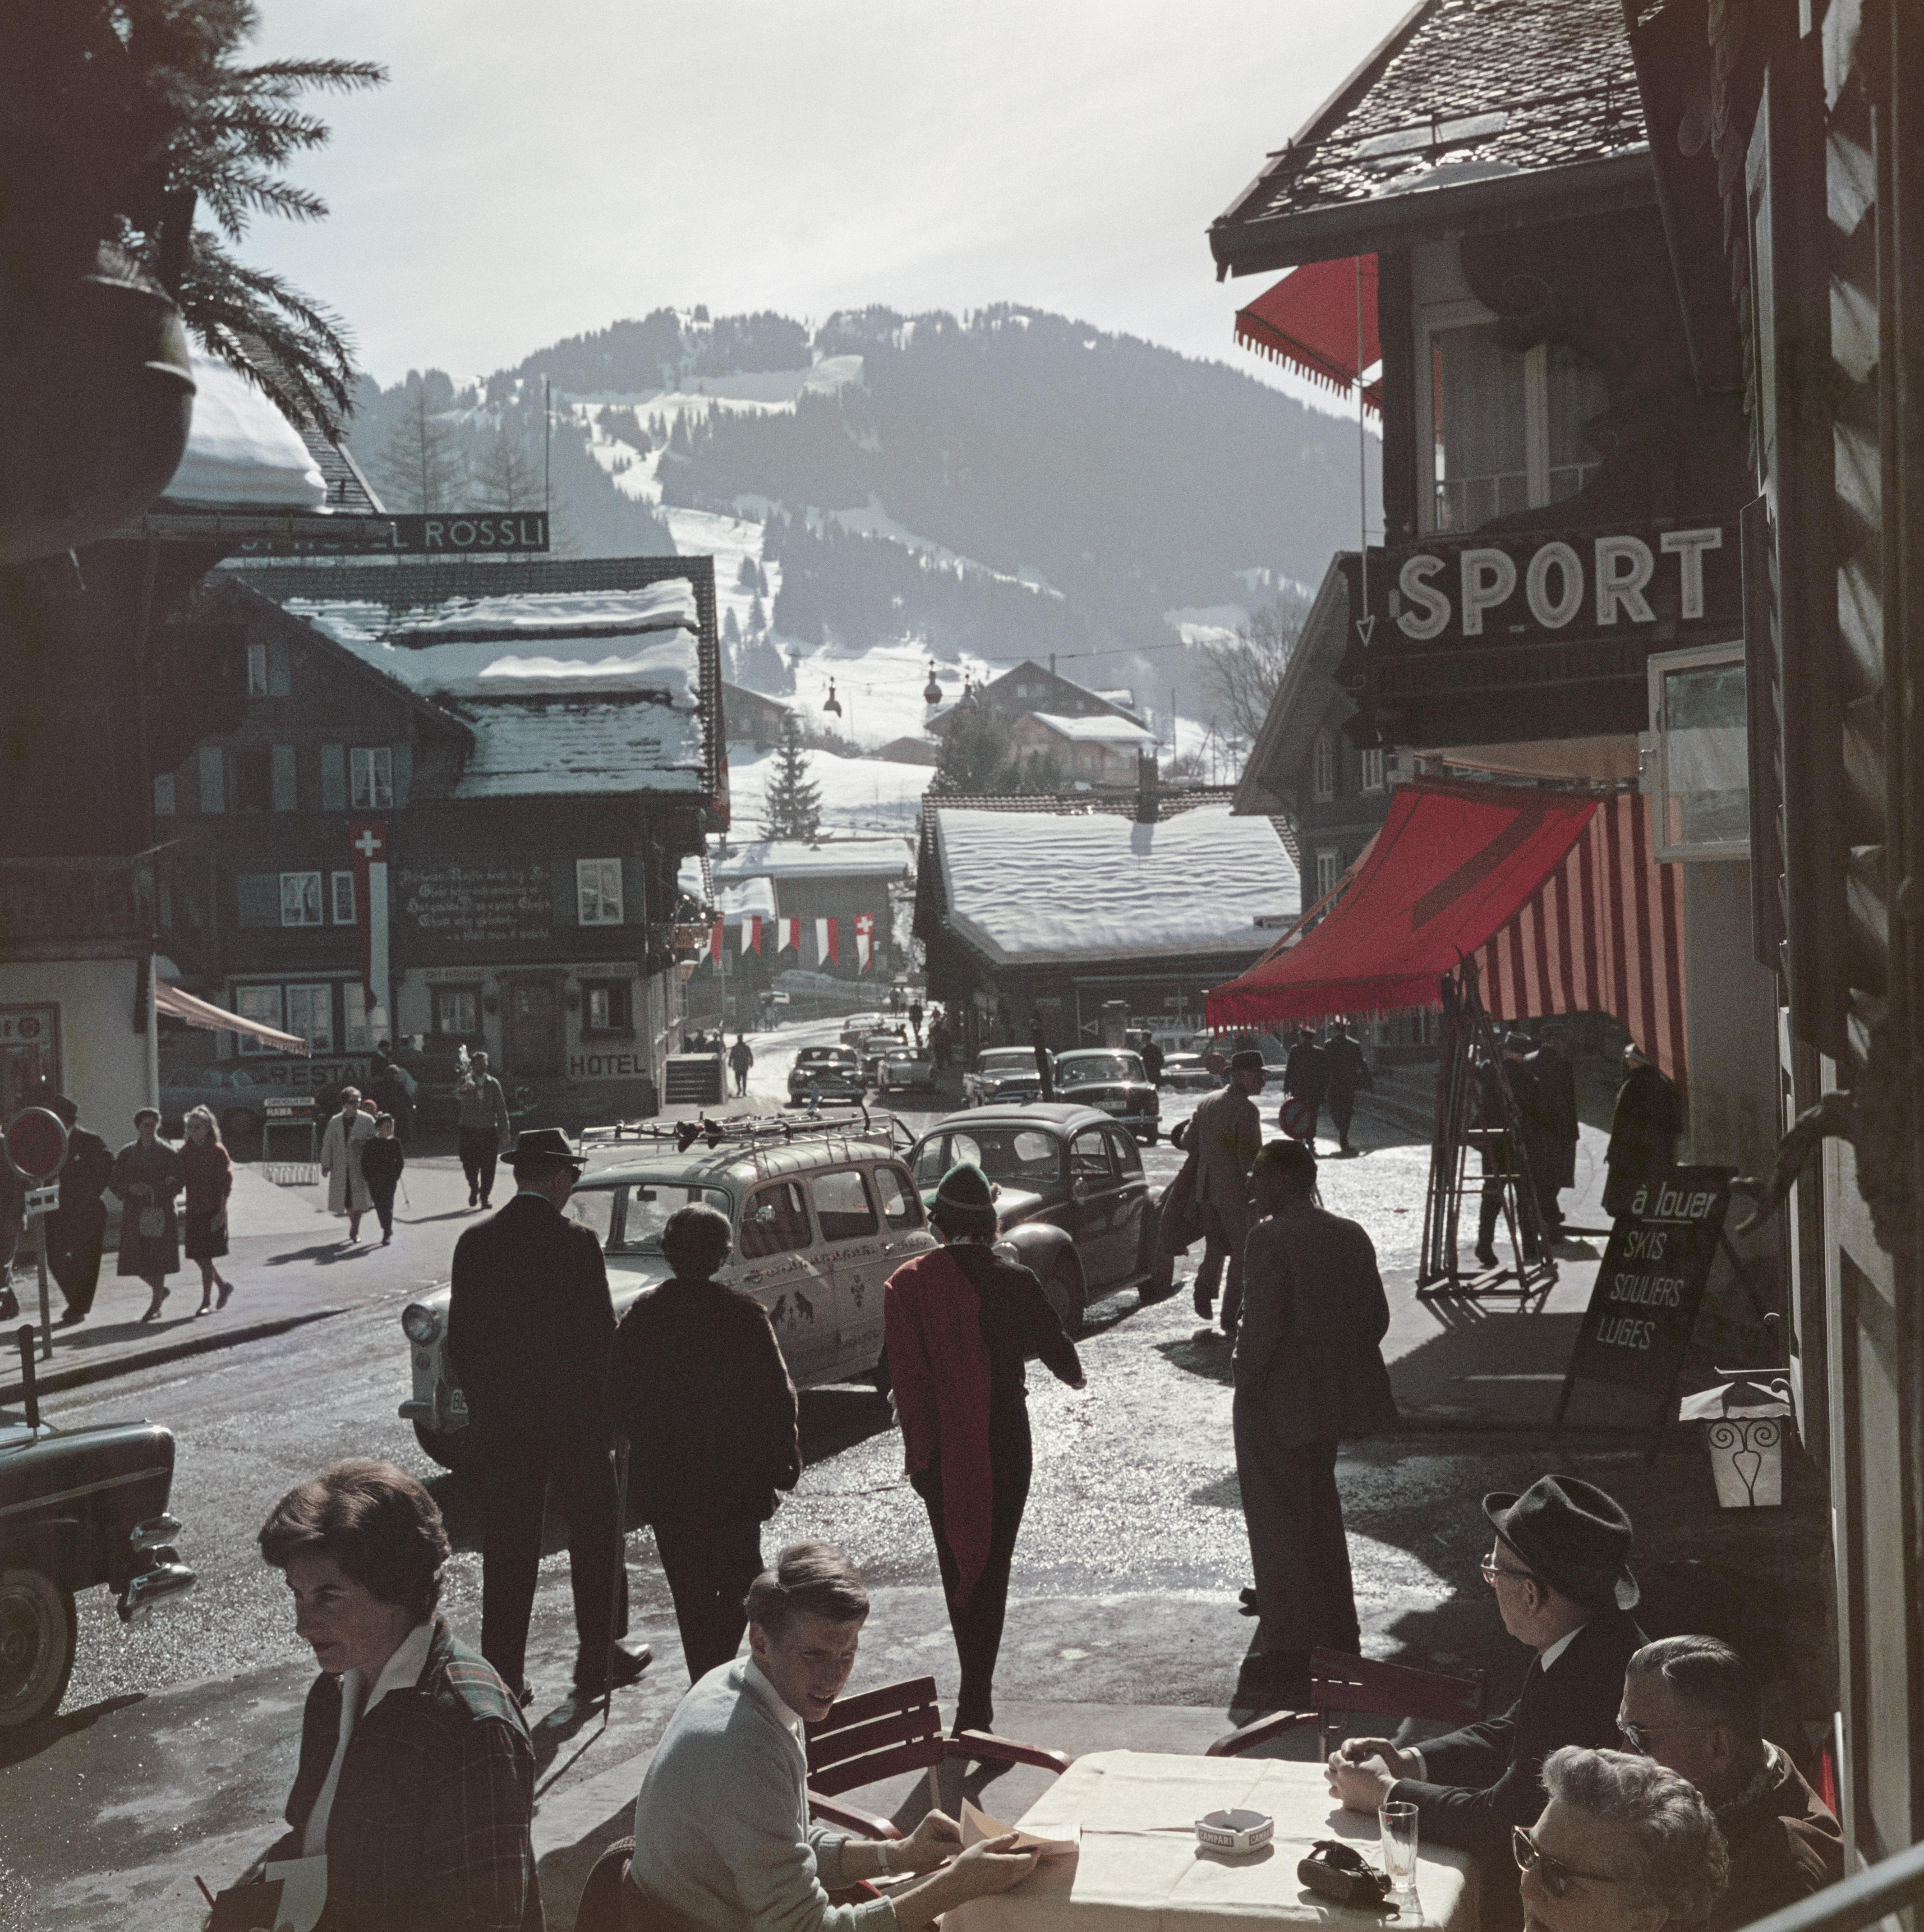 The town centre at the ski resort of Gstaad, Switzerland, 1961. 

Once a year, we uncover never-before-seen Slim Aarons images! This is one of fifteen from our new collection. A word from our Curator Shawn Waldron:  ‘For the 2019 edition – our third